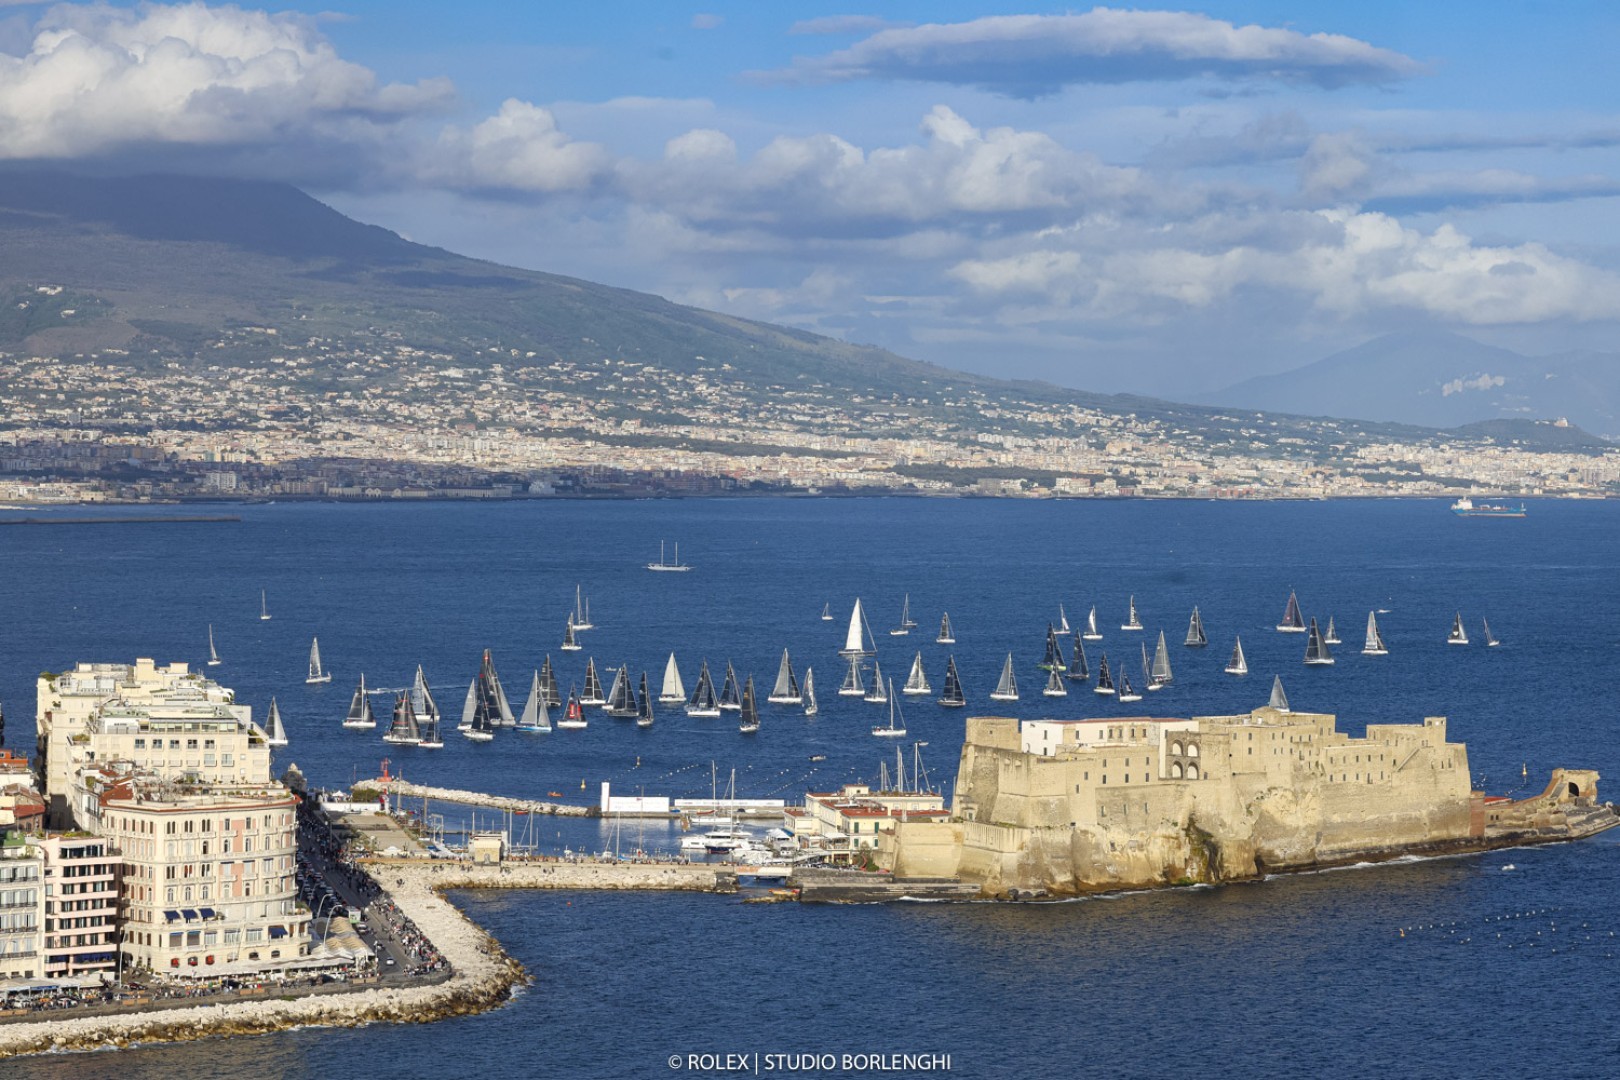 Last year's Regata dei Tre Golfi sets sail from off Santa Lucia. The infamous Mount Vesuvius is in the background.